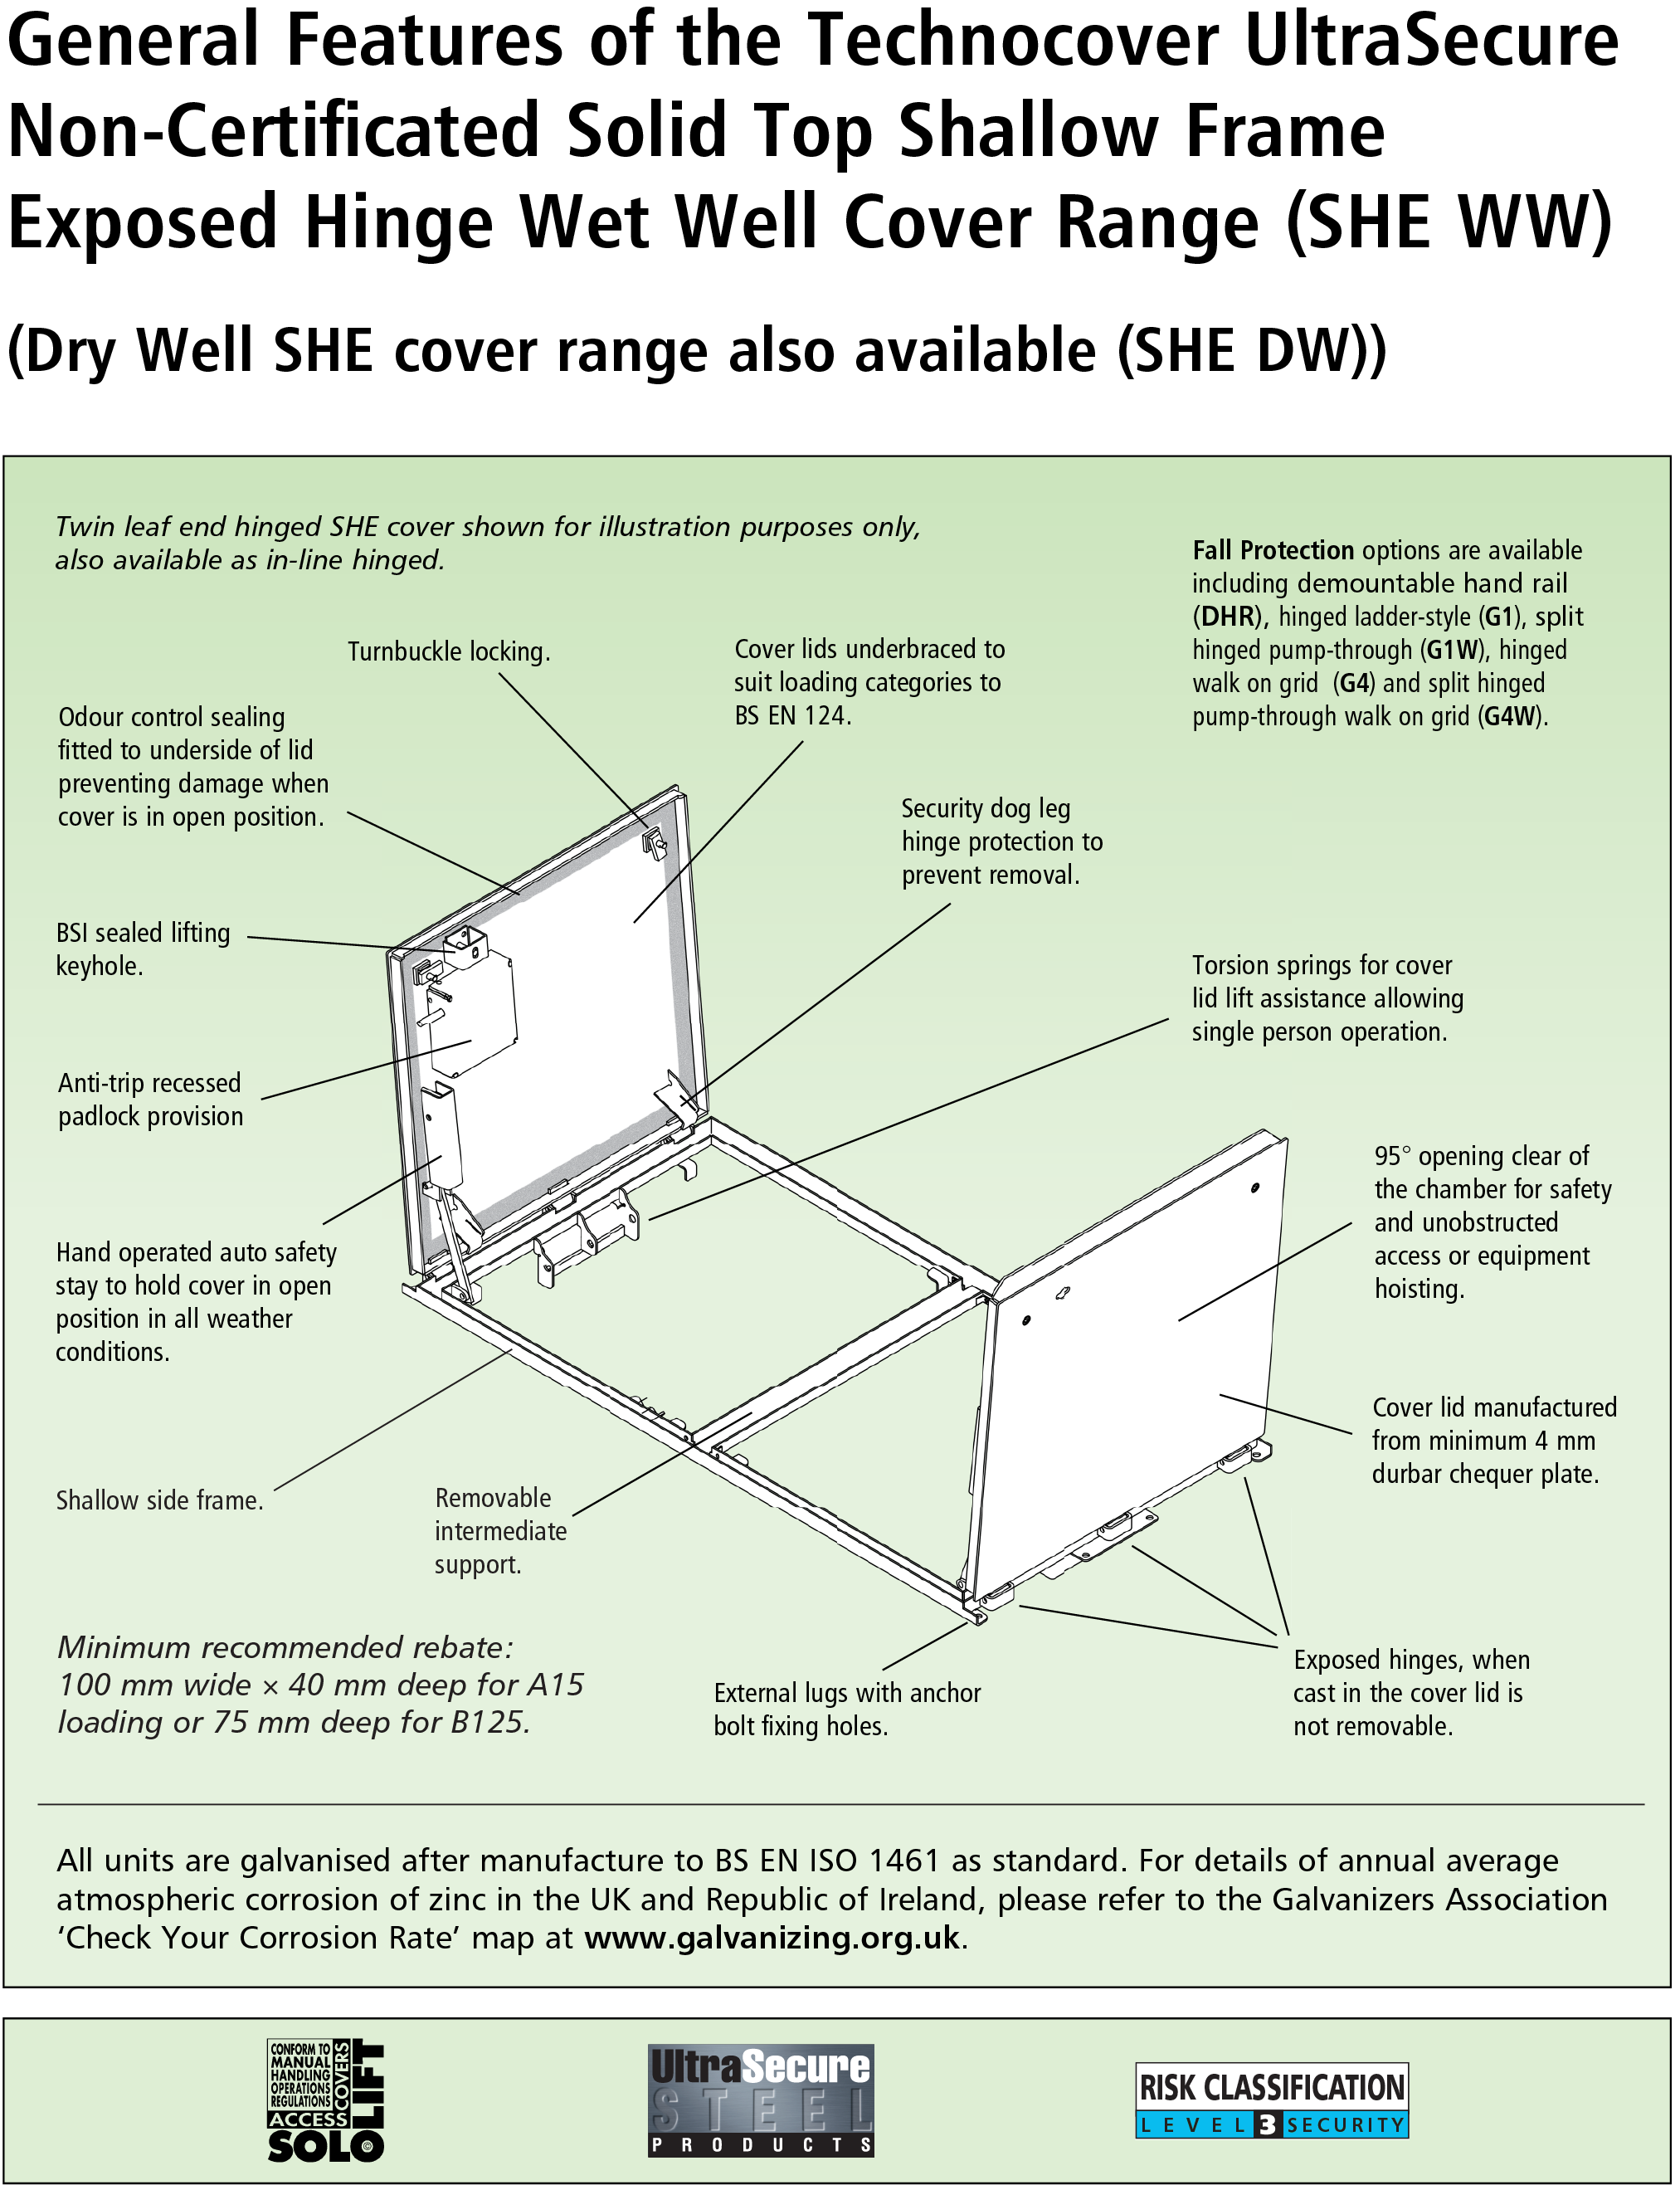 General features of the SHE range